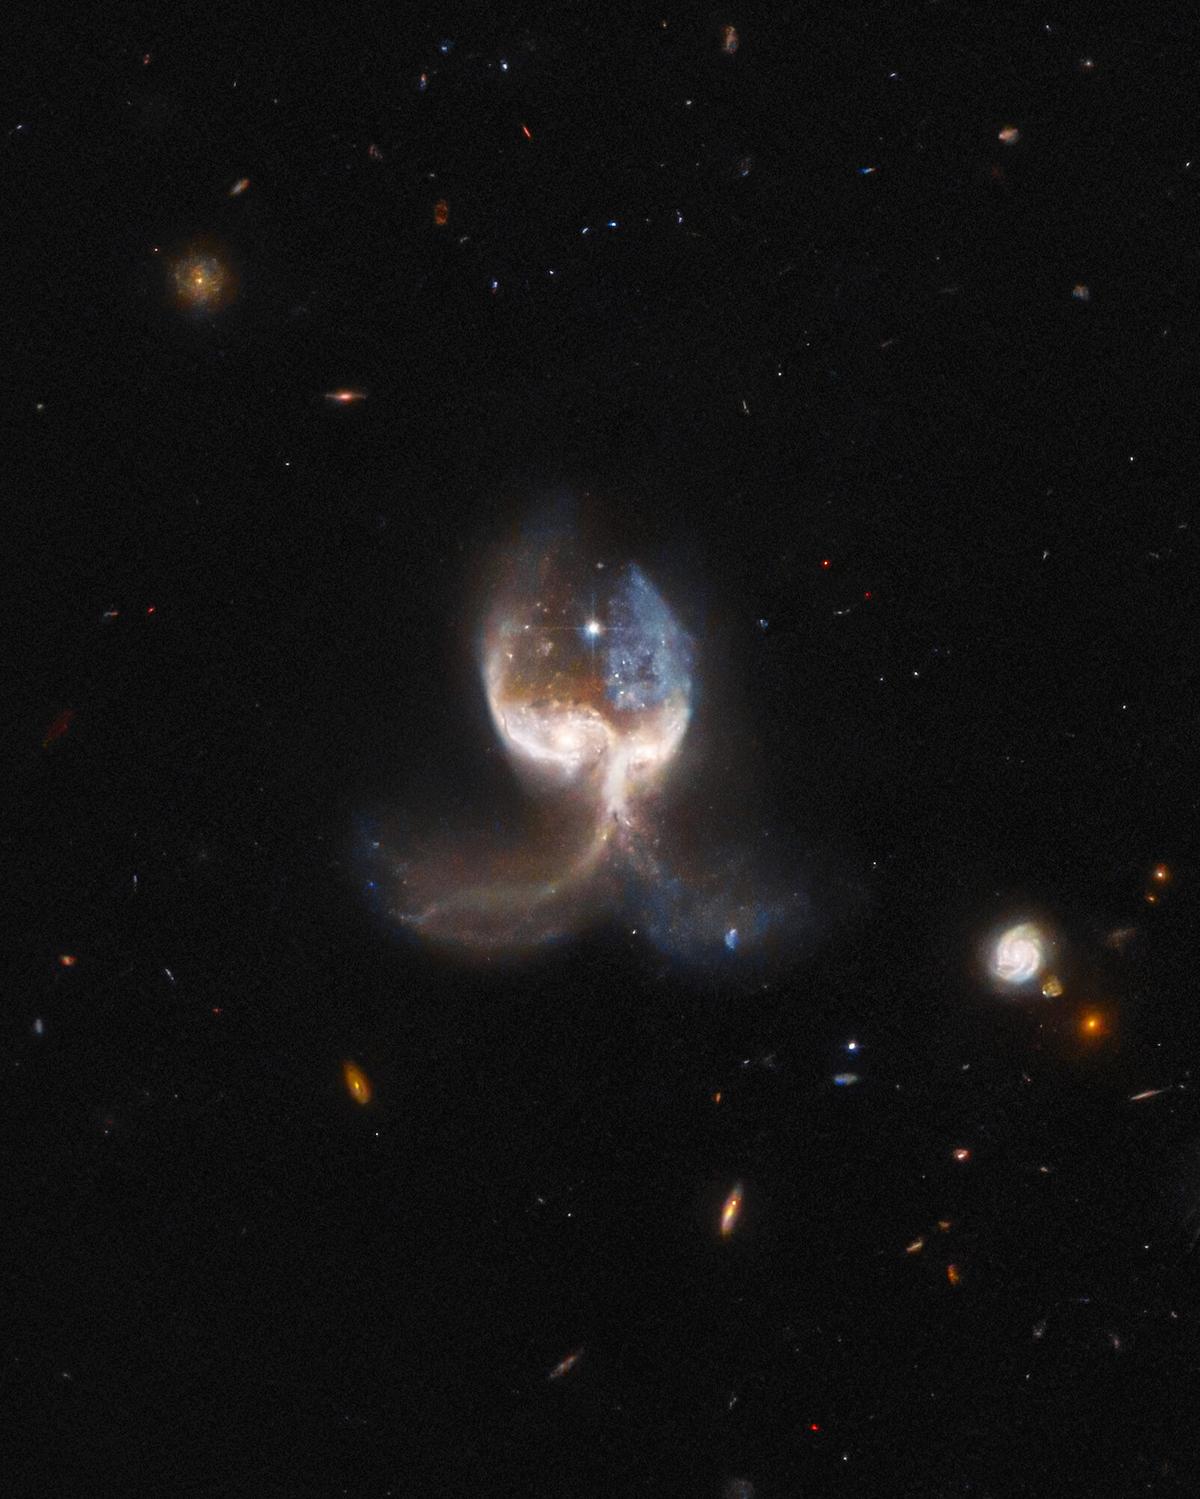 Detail of the two merging galaxies in the VV689 system. (<a href="https://esahubble.org/images/potw2216b/">ESA/Hubble</a> and NASA, W. Keel. Acknowledgement: J. Schmidt/CC BY 4.0)